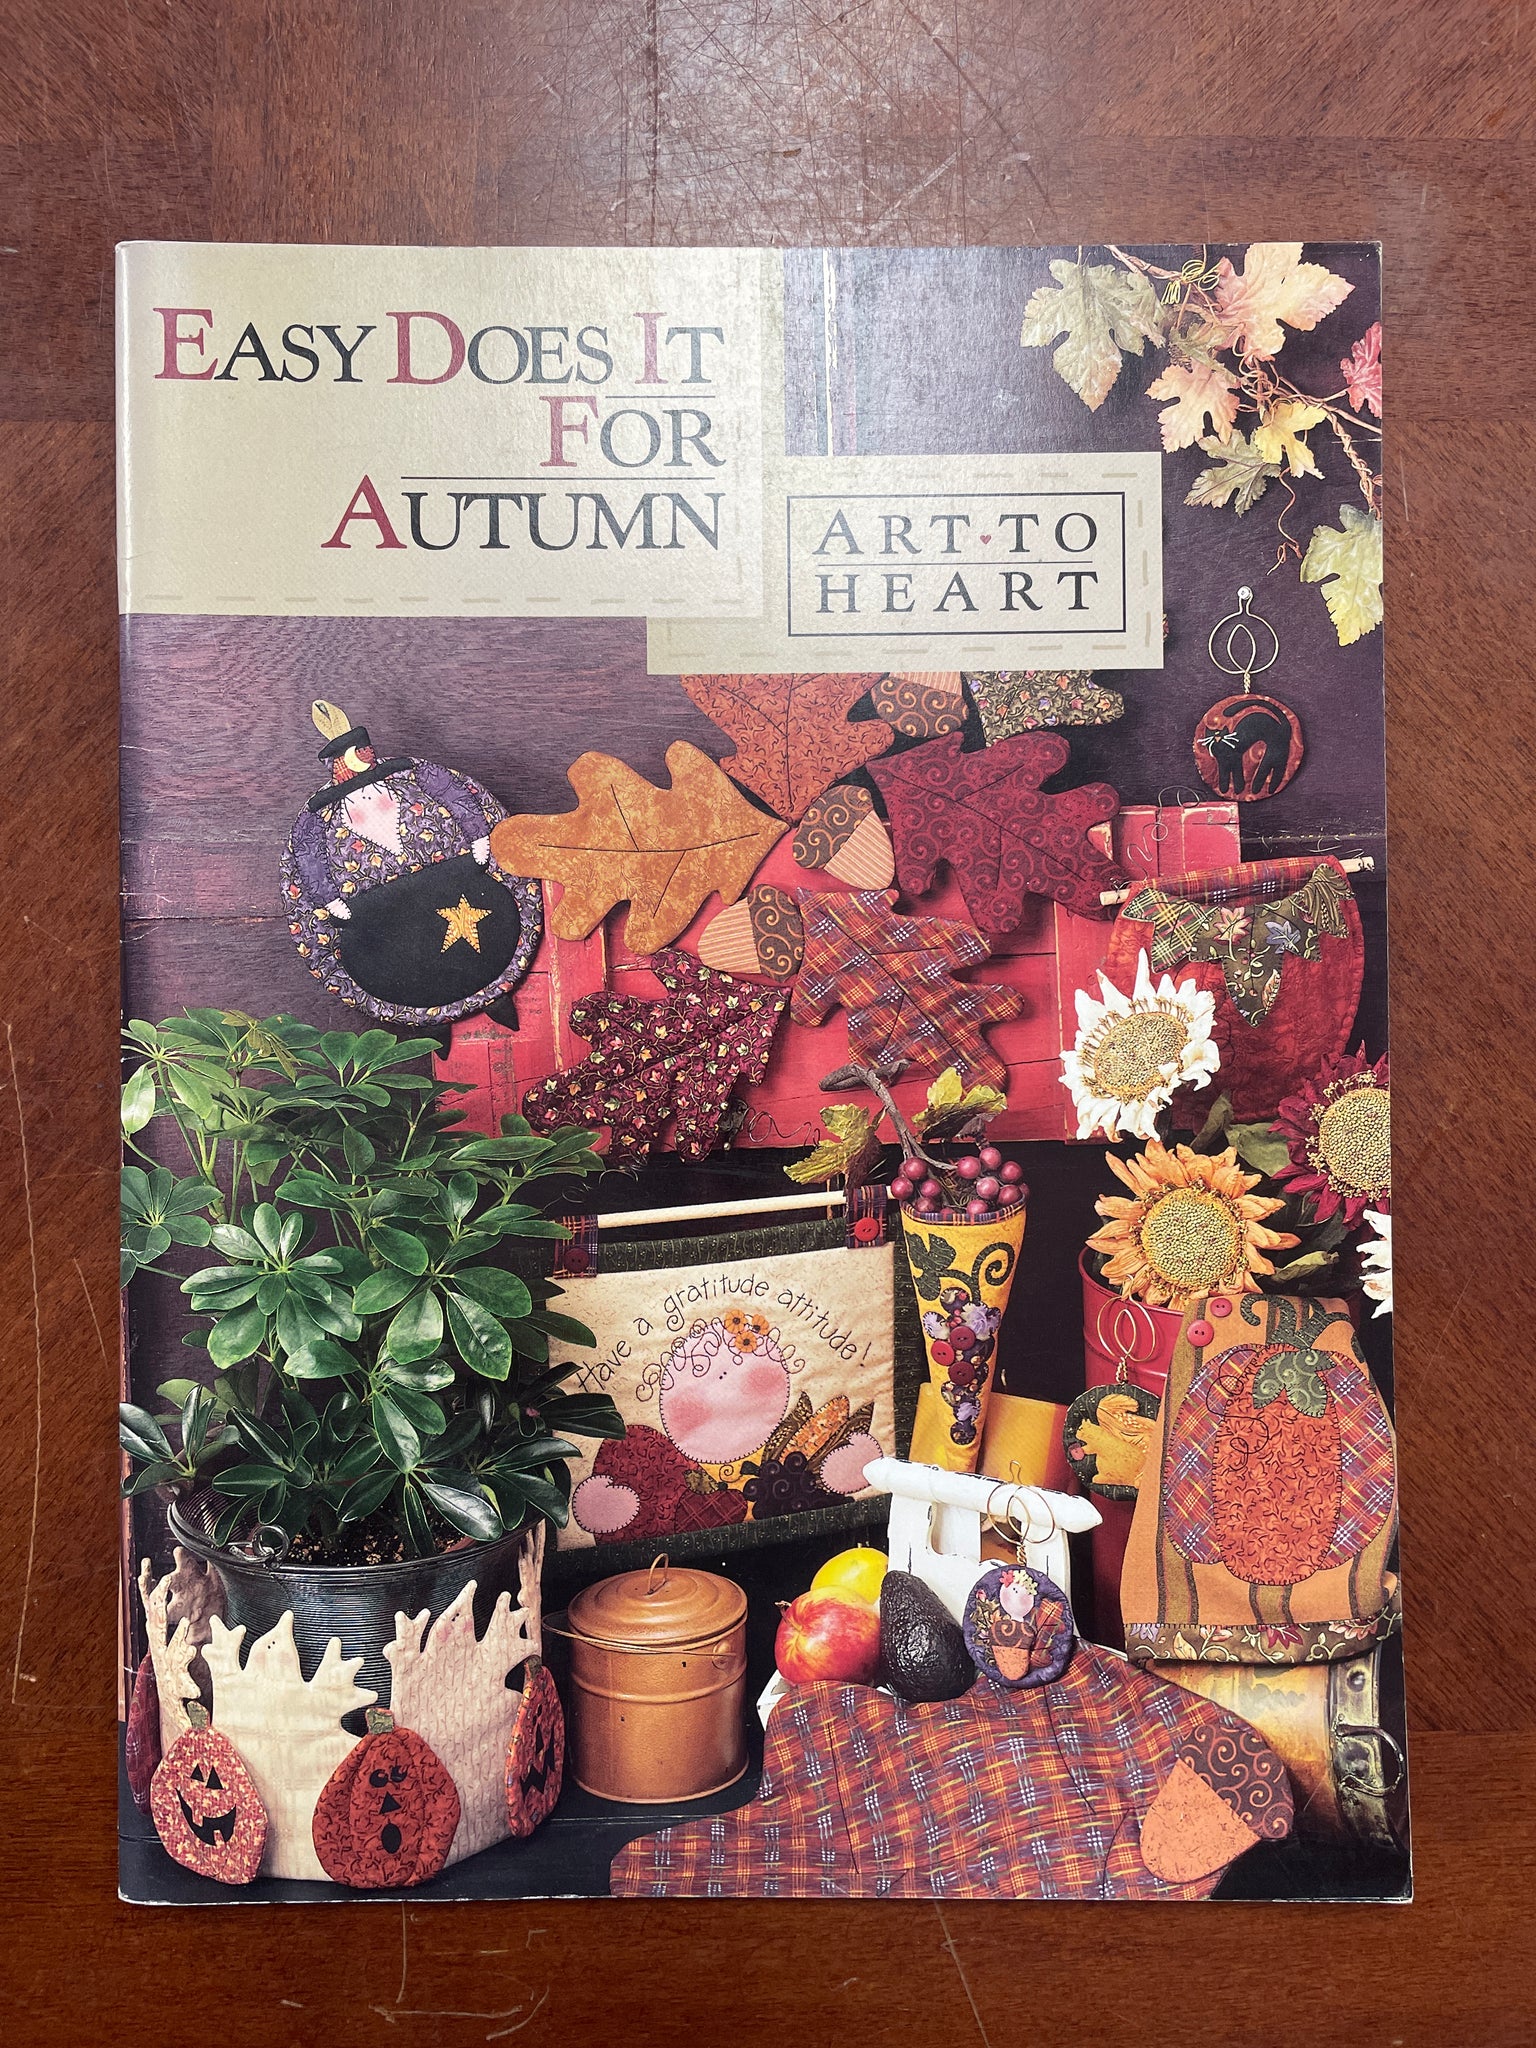 2003 Quilted Appliqué Pattern Book - "Easy Does It For Autumn"